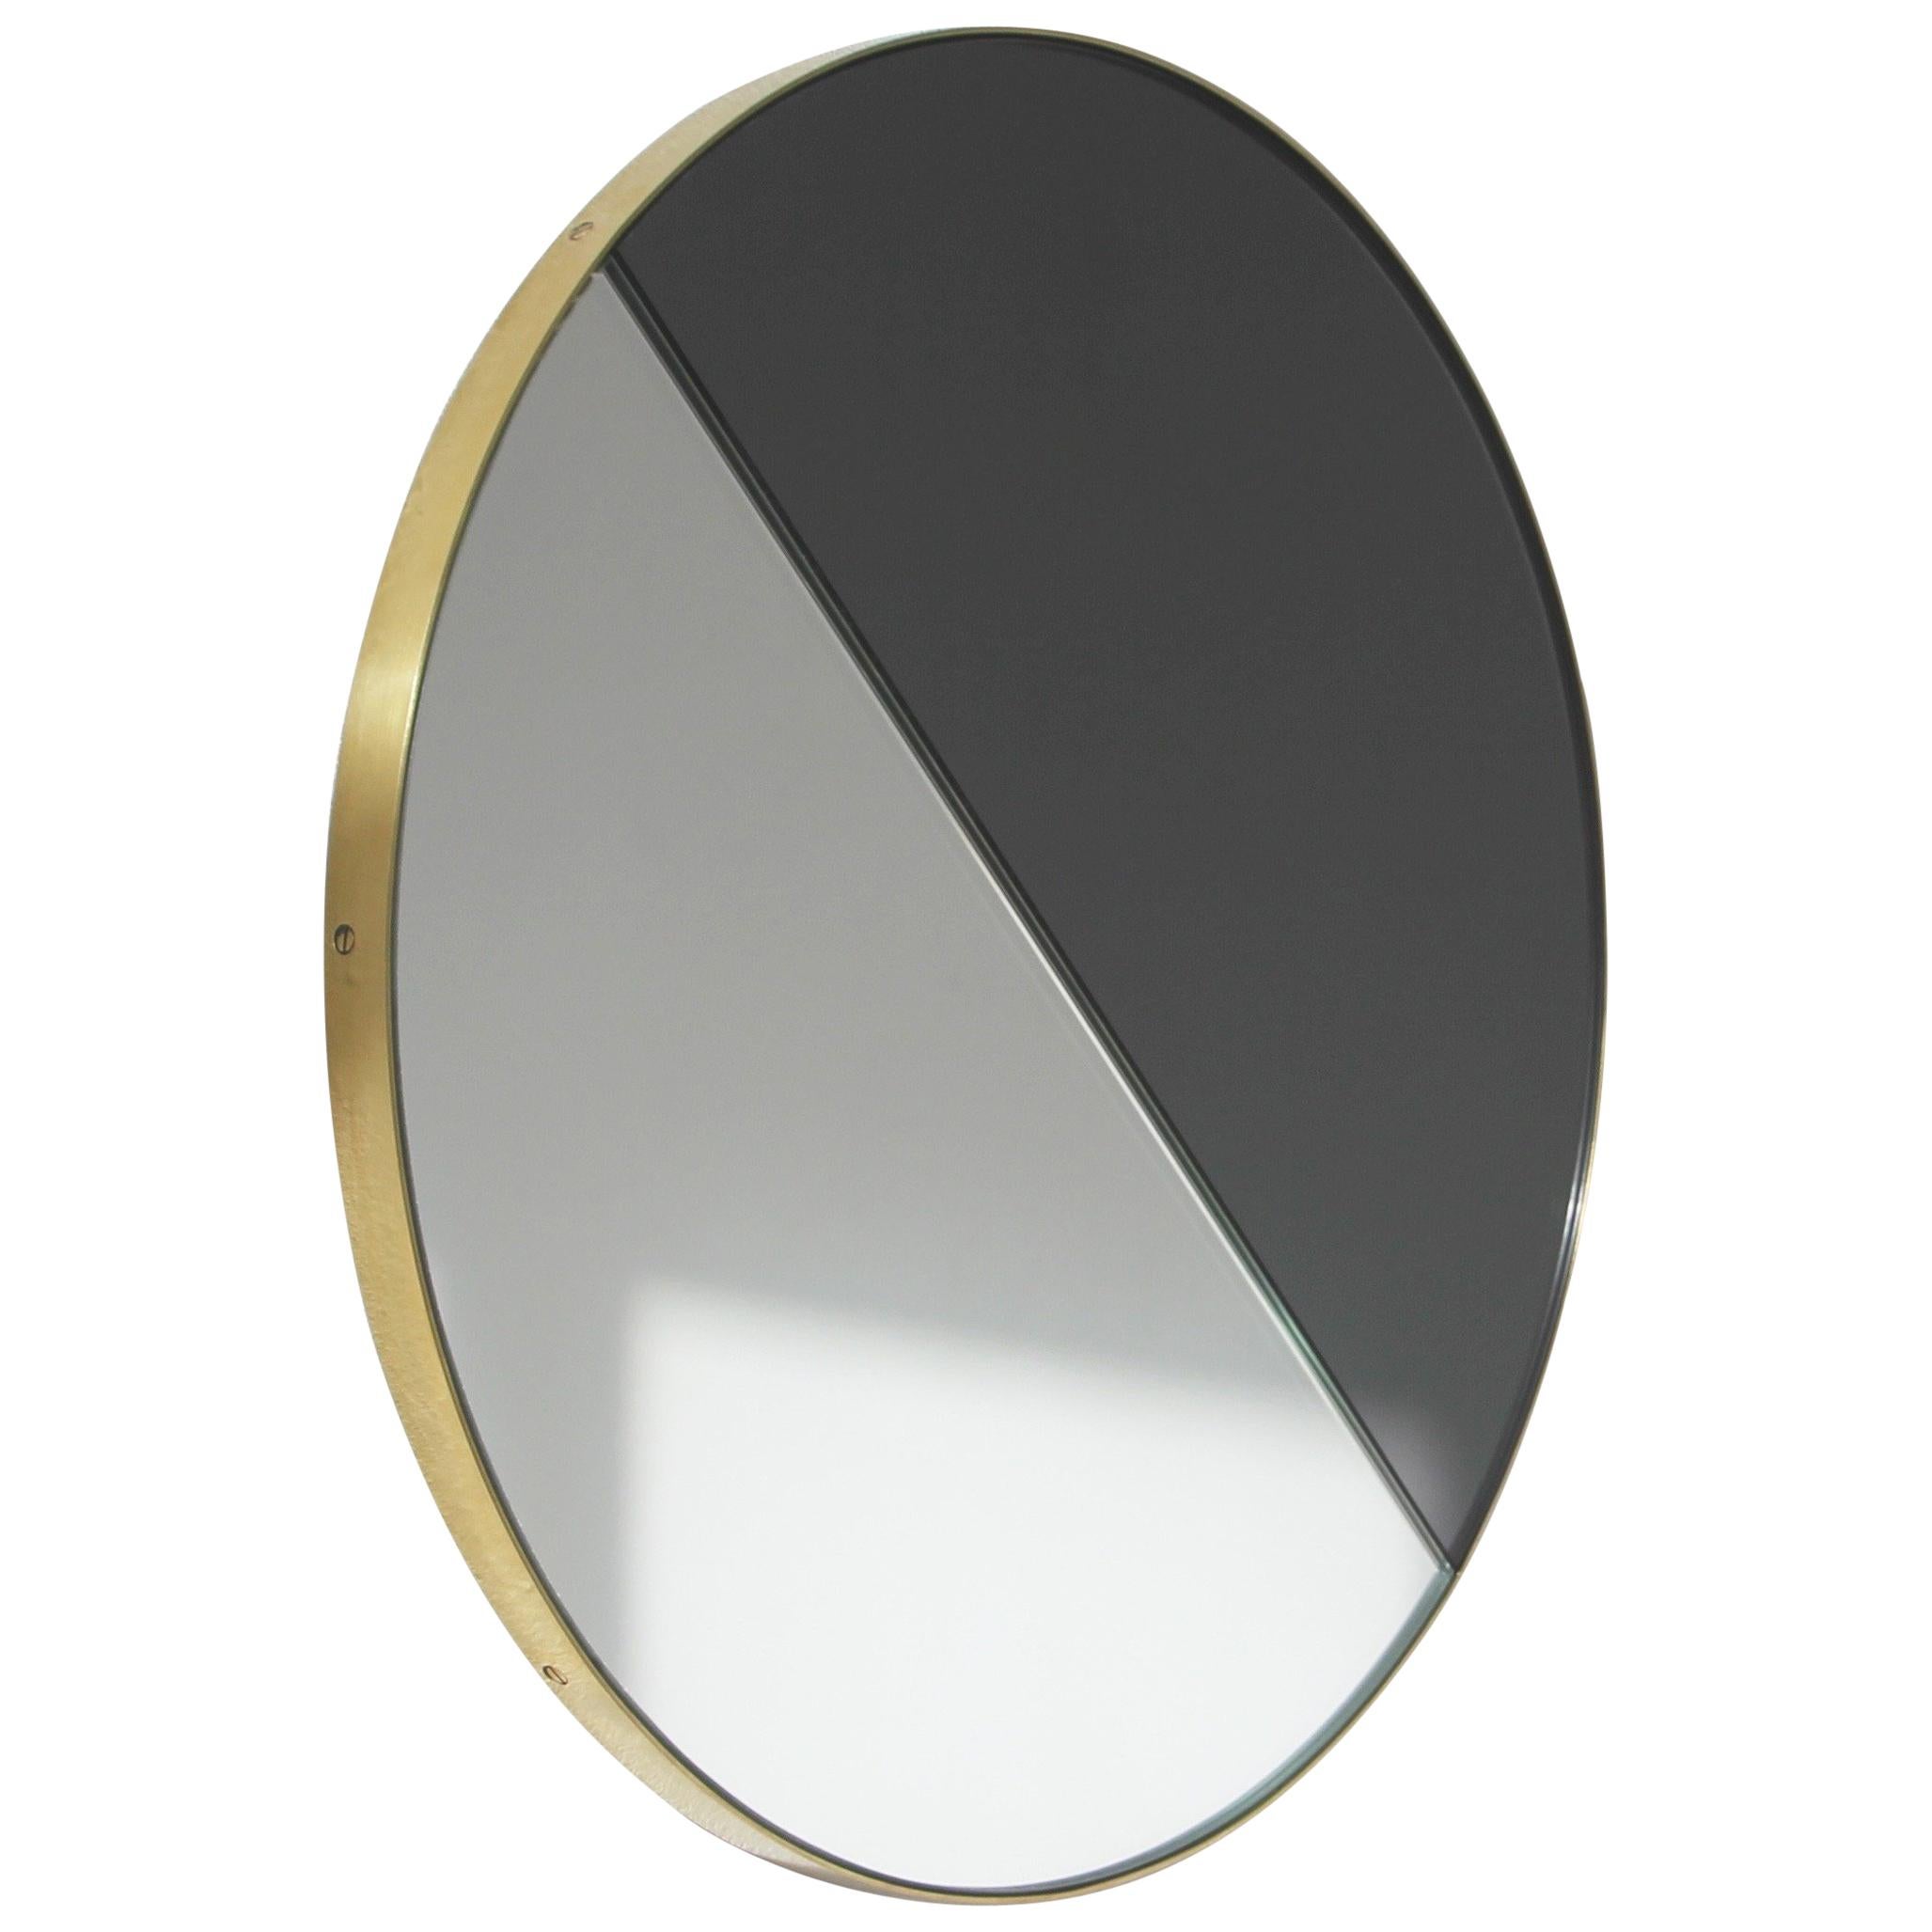 Orbis Dualis Mixed Tint Contemporary Round Mirror with Brass Frame, Large For Sale